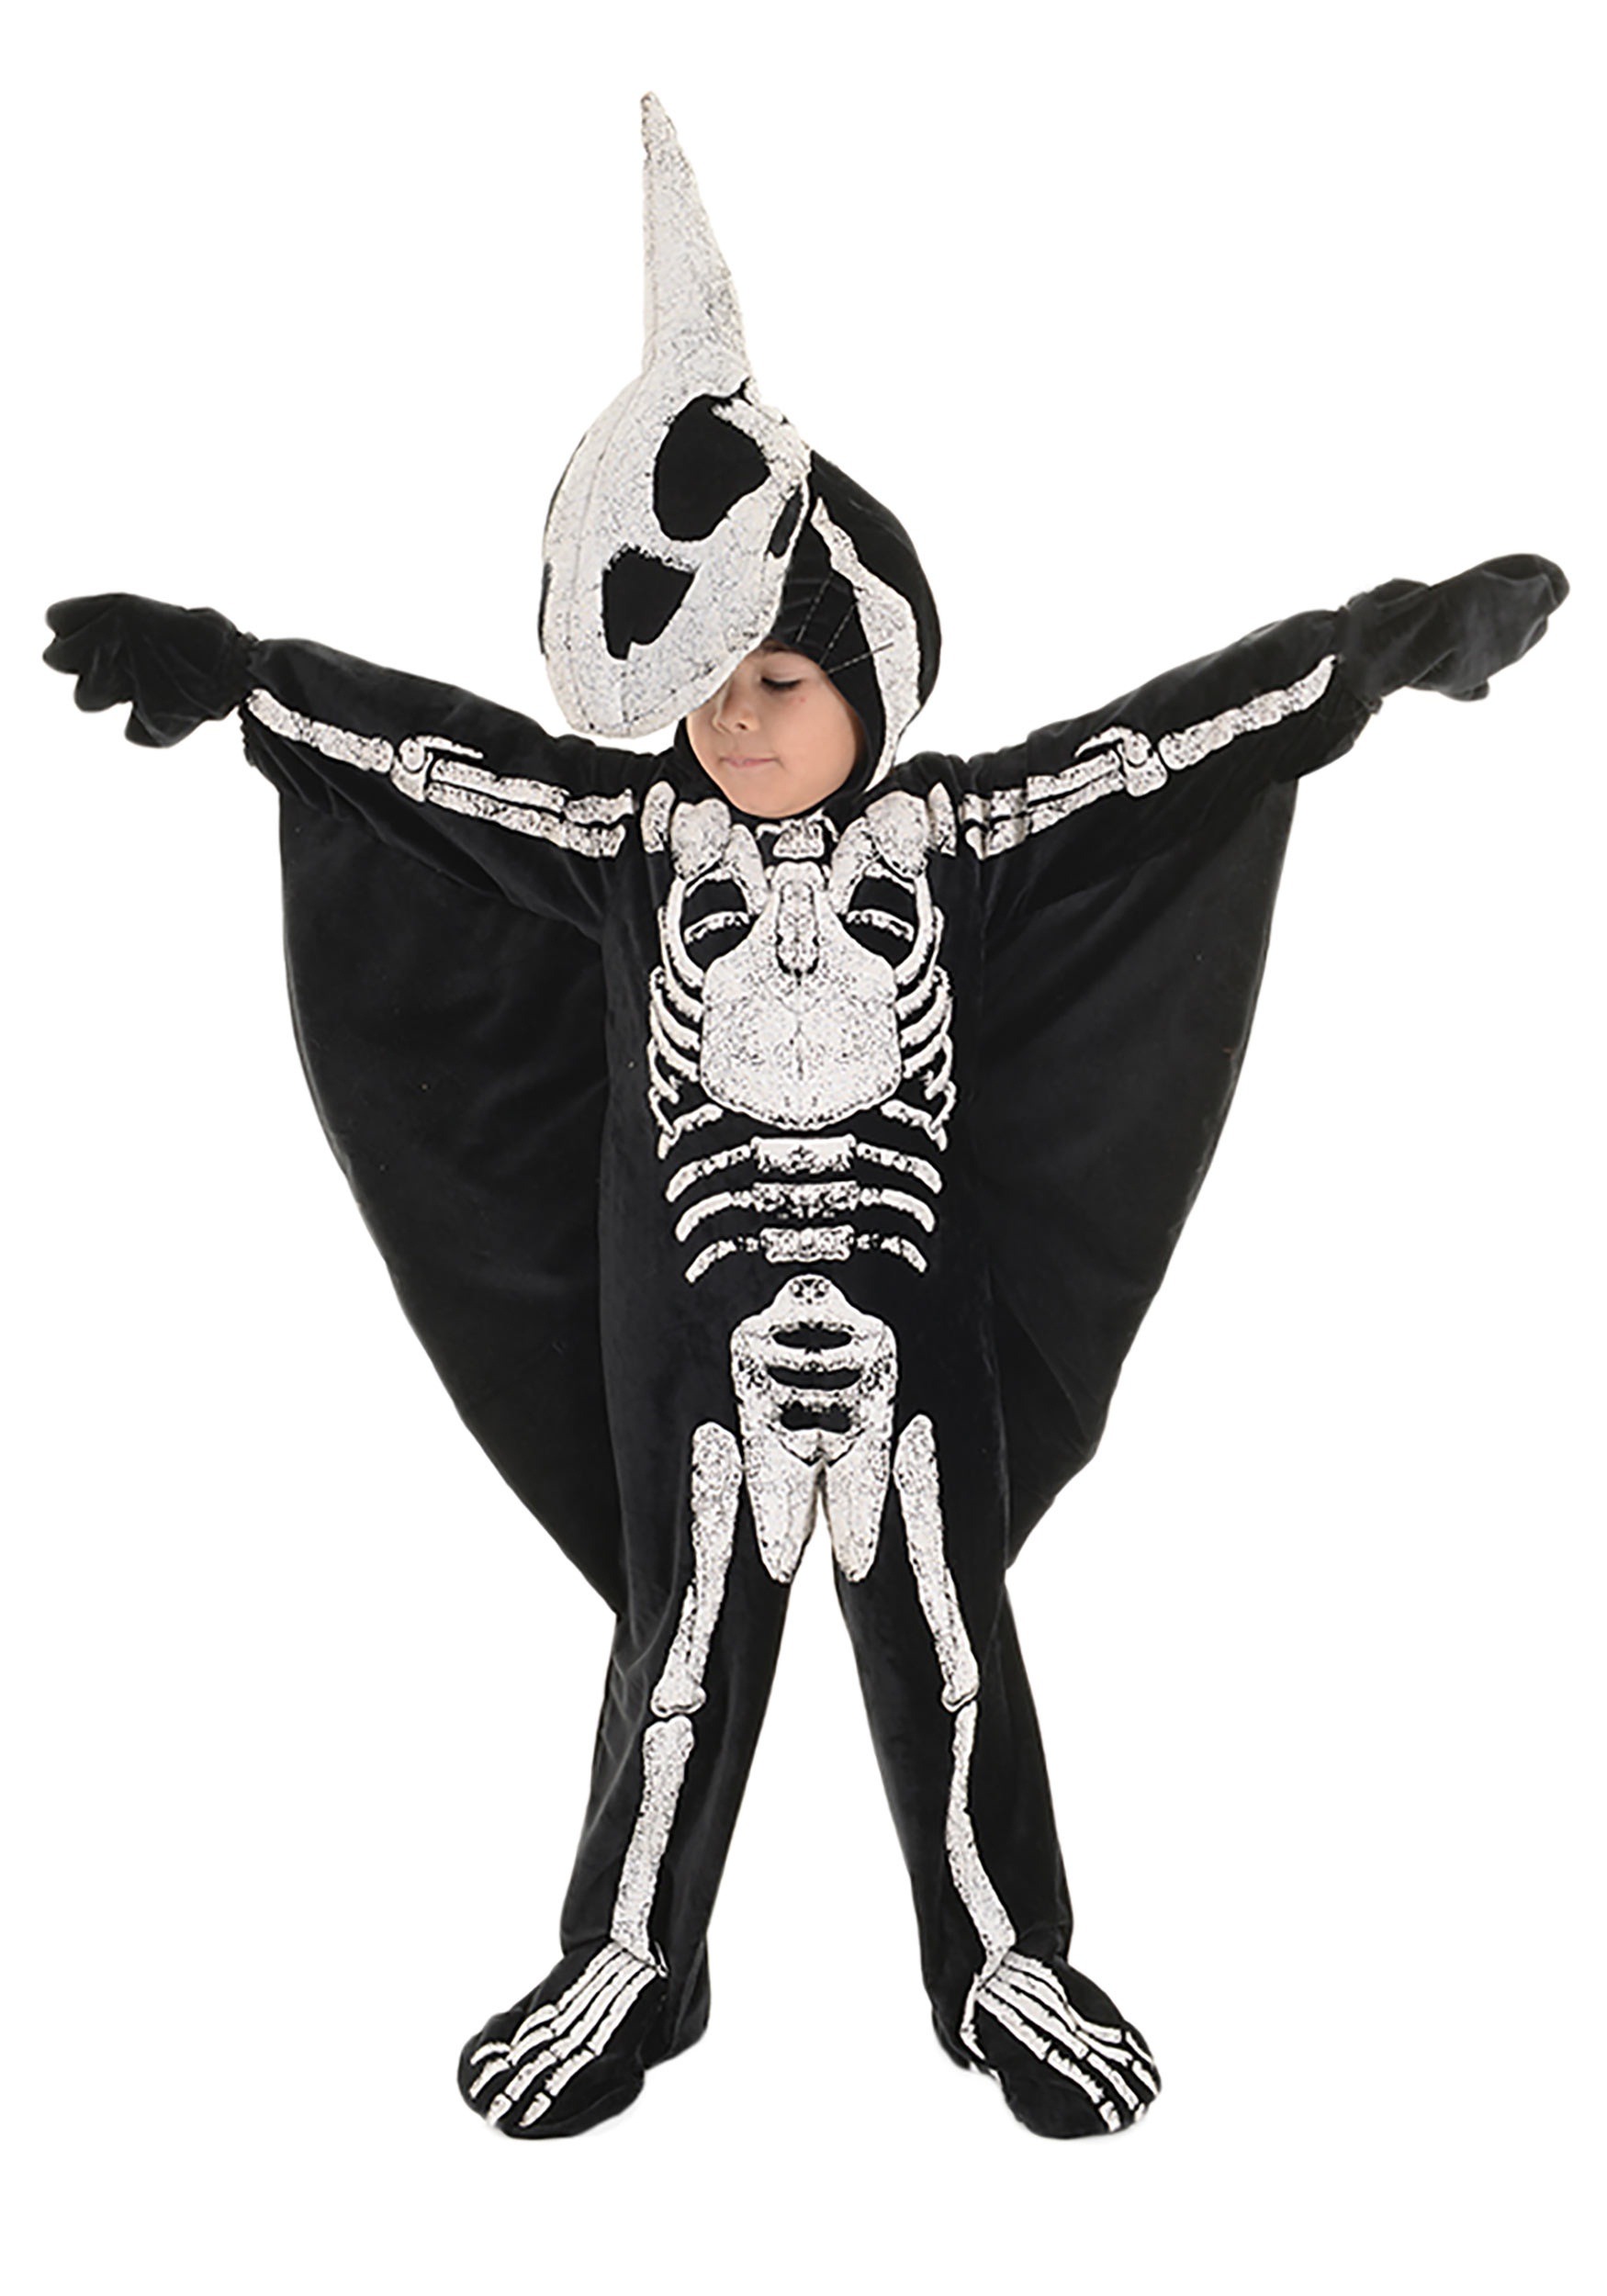 Photos - Fancy Dress FOSSIL Underwraps Pterodactyl  Costume for Toddlers Black/White UN26246 